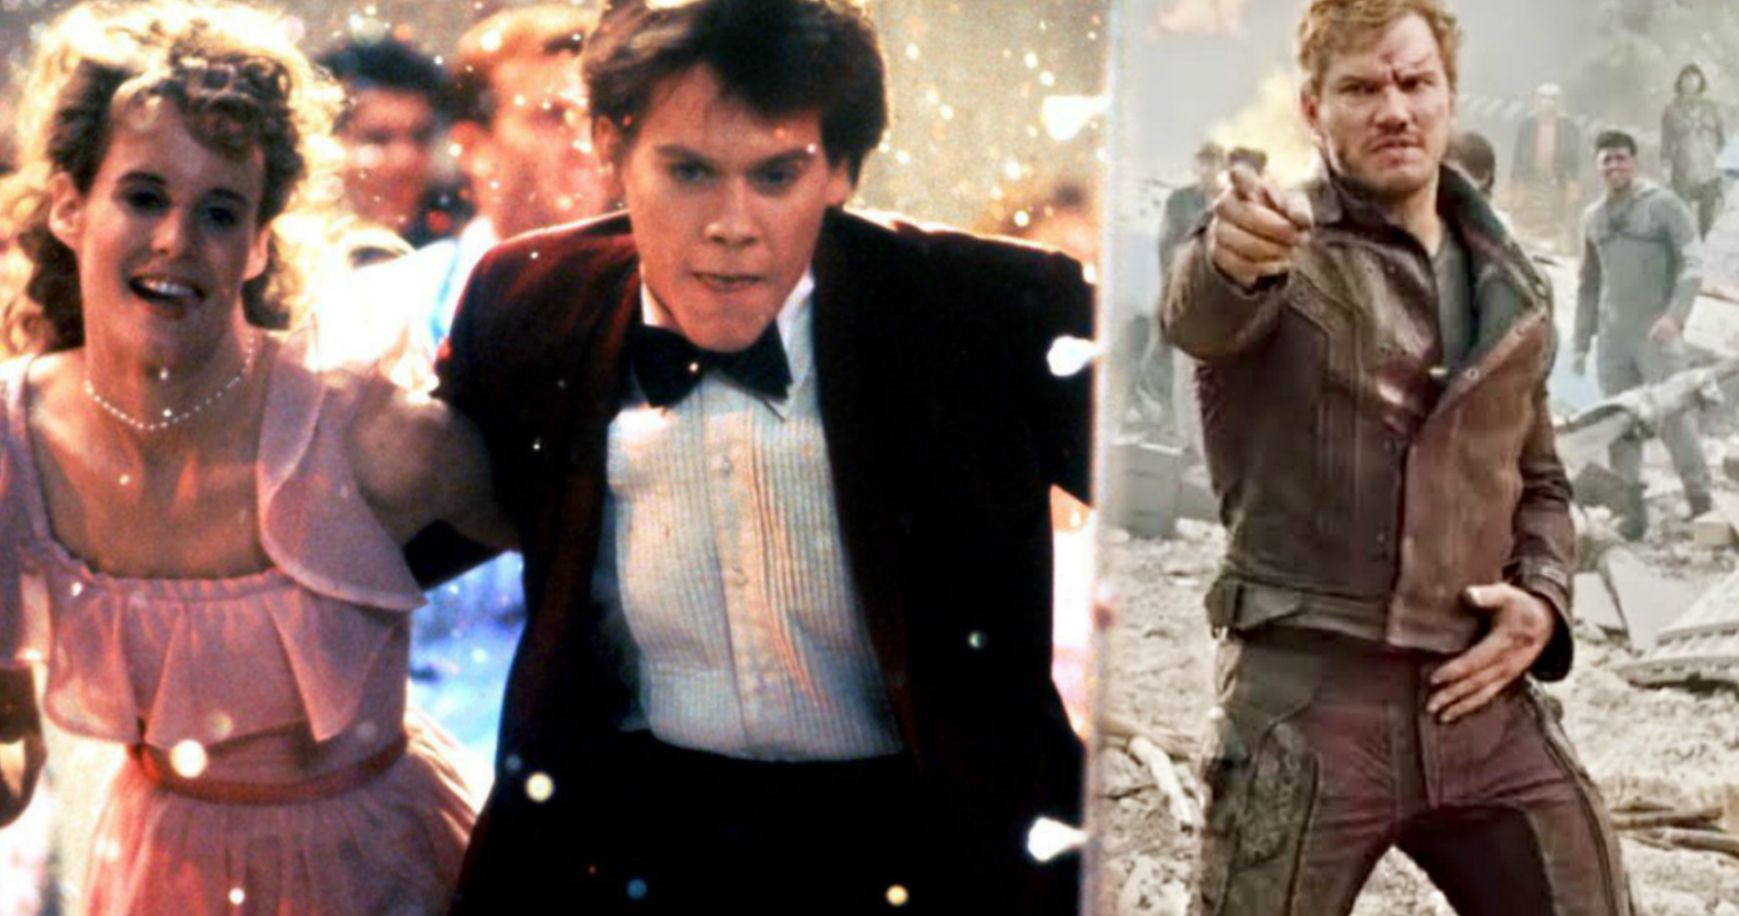 Kevin Bacon Challenges Star-Lord to a Footloose Dance-Off and Chris Pratt Says No Way